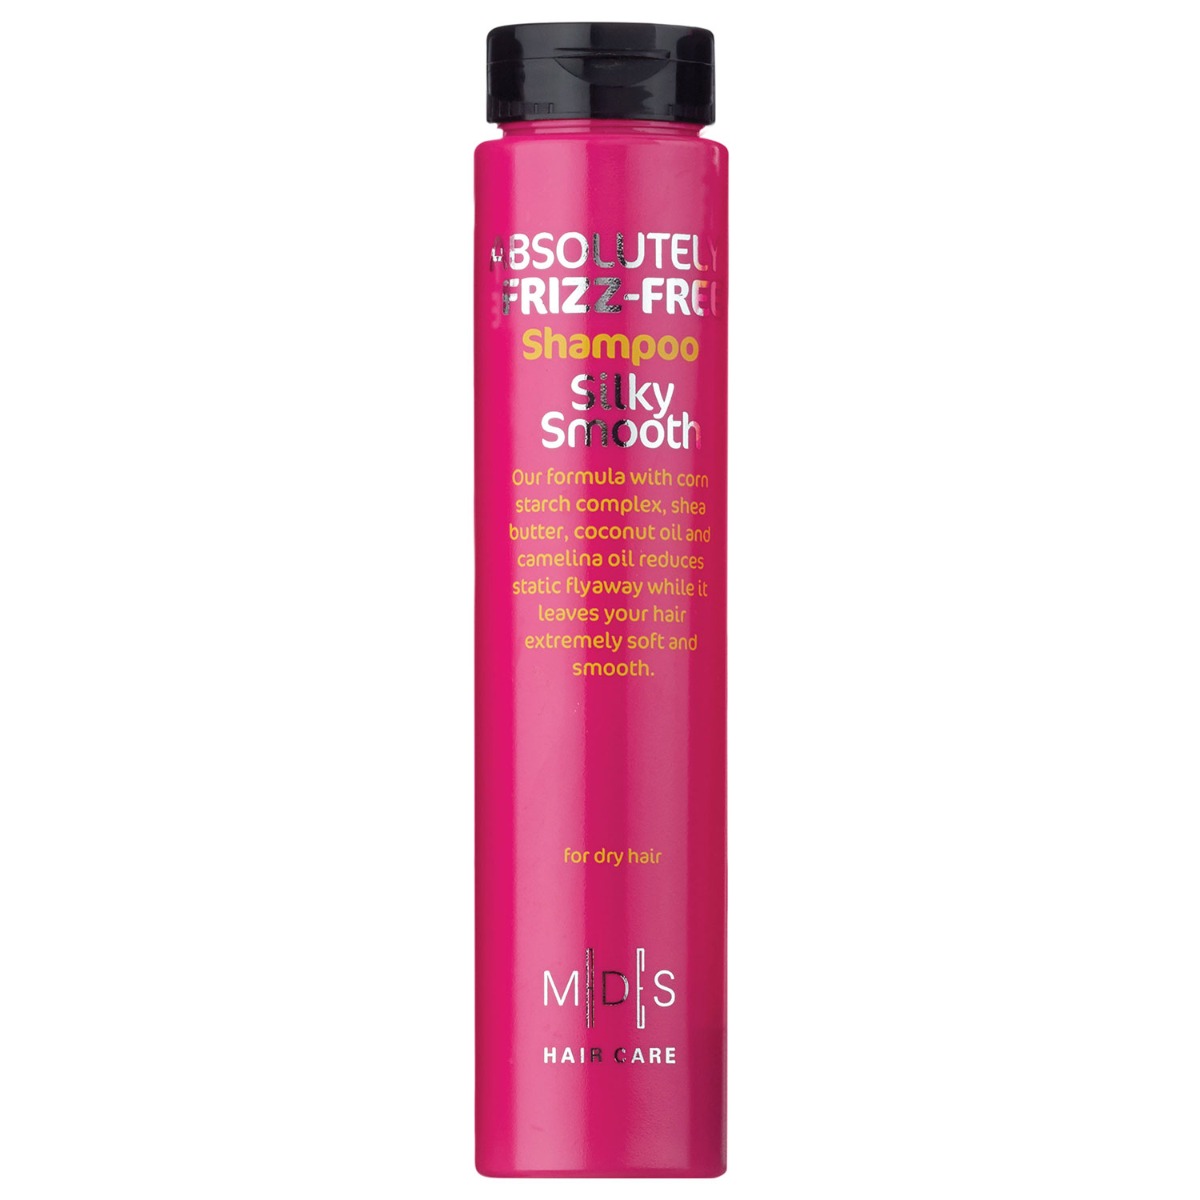 MADES Hair Care Absolutely Anti Frizz Shampoo Silky Smooth, 250ml